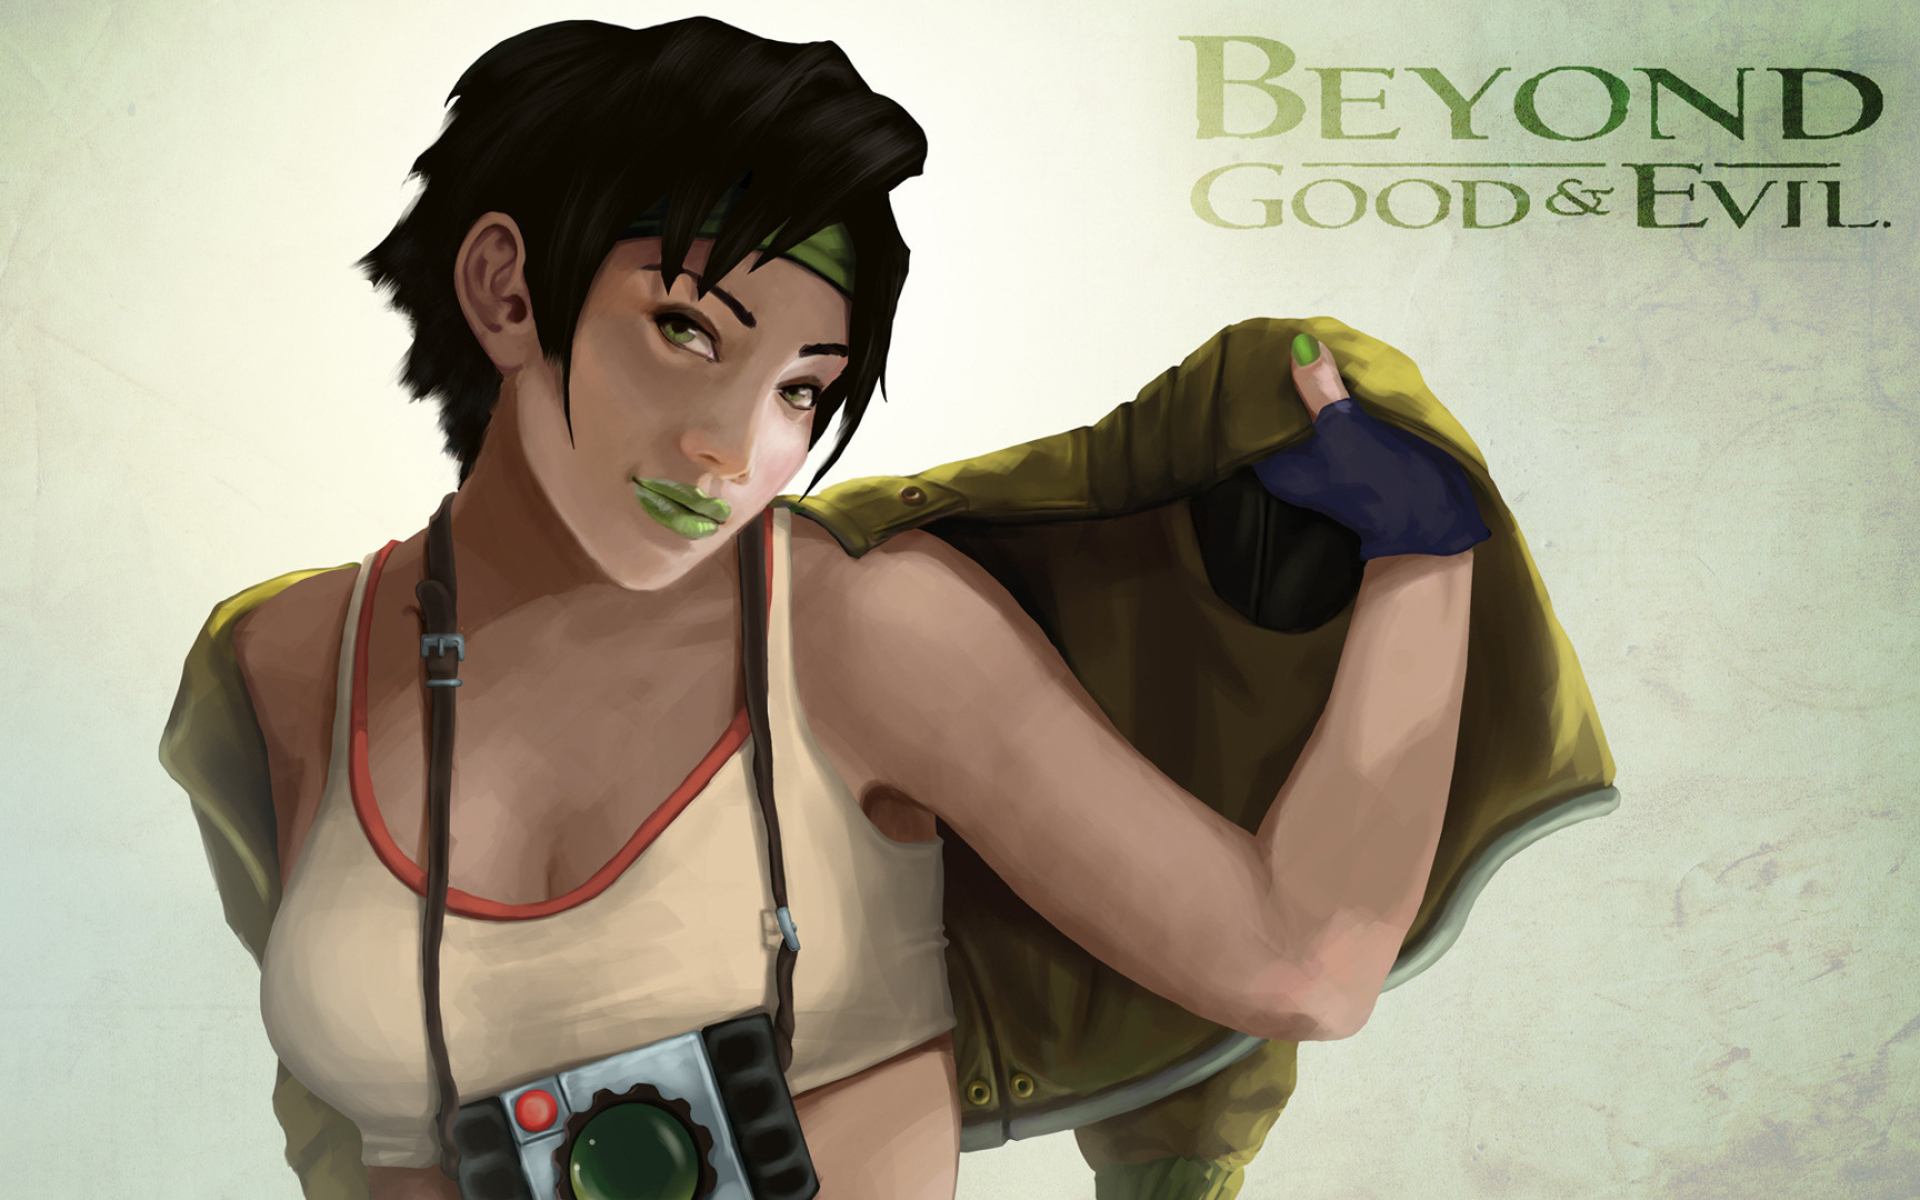 Beyond Good and Evil (Game): Jade, The protagonist, A young woman from the planet Hillys in System 4, Fictional character. 1920x1200 HD Wallpaper.